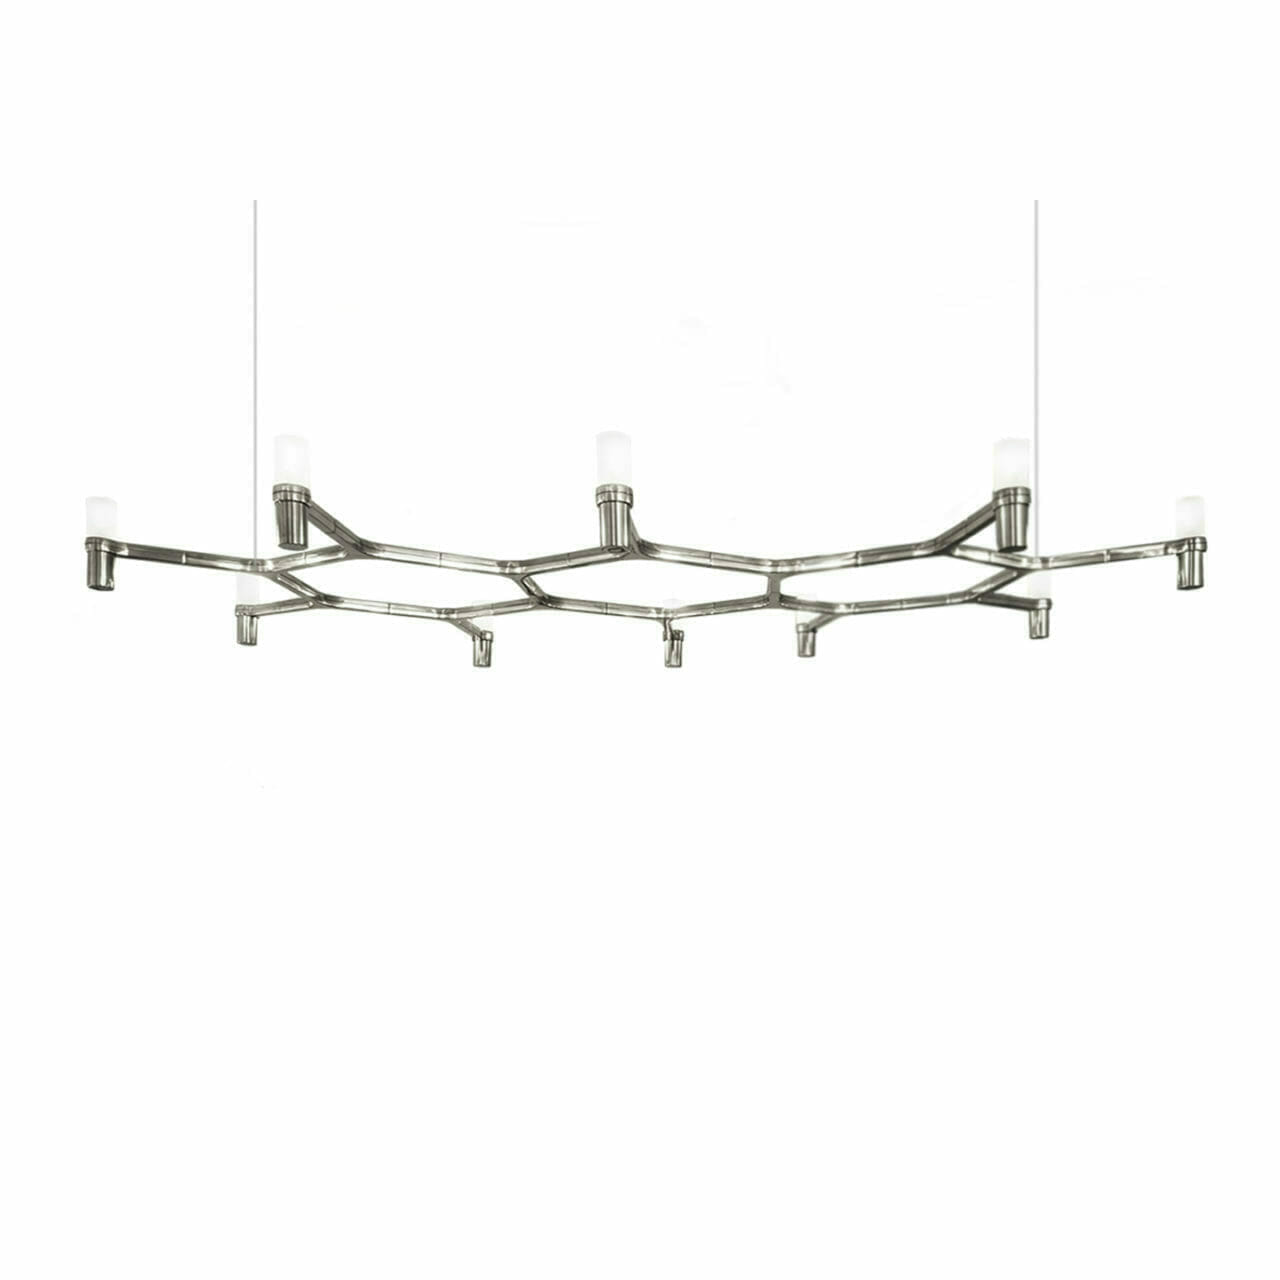 Nemo Lighting Crown Plana Pendant Light by Olson and Baker - Designer & Contemporary Sofas, Furniture - Olson and Baker showcases original designs from authentic, designer brands. Buy contemporary furniture, lighting, storage, sofas & chairs at Olson + Baker.